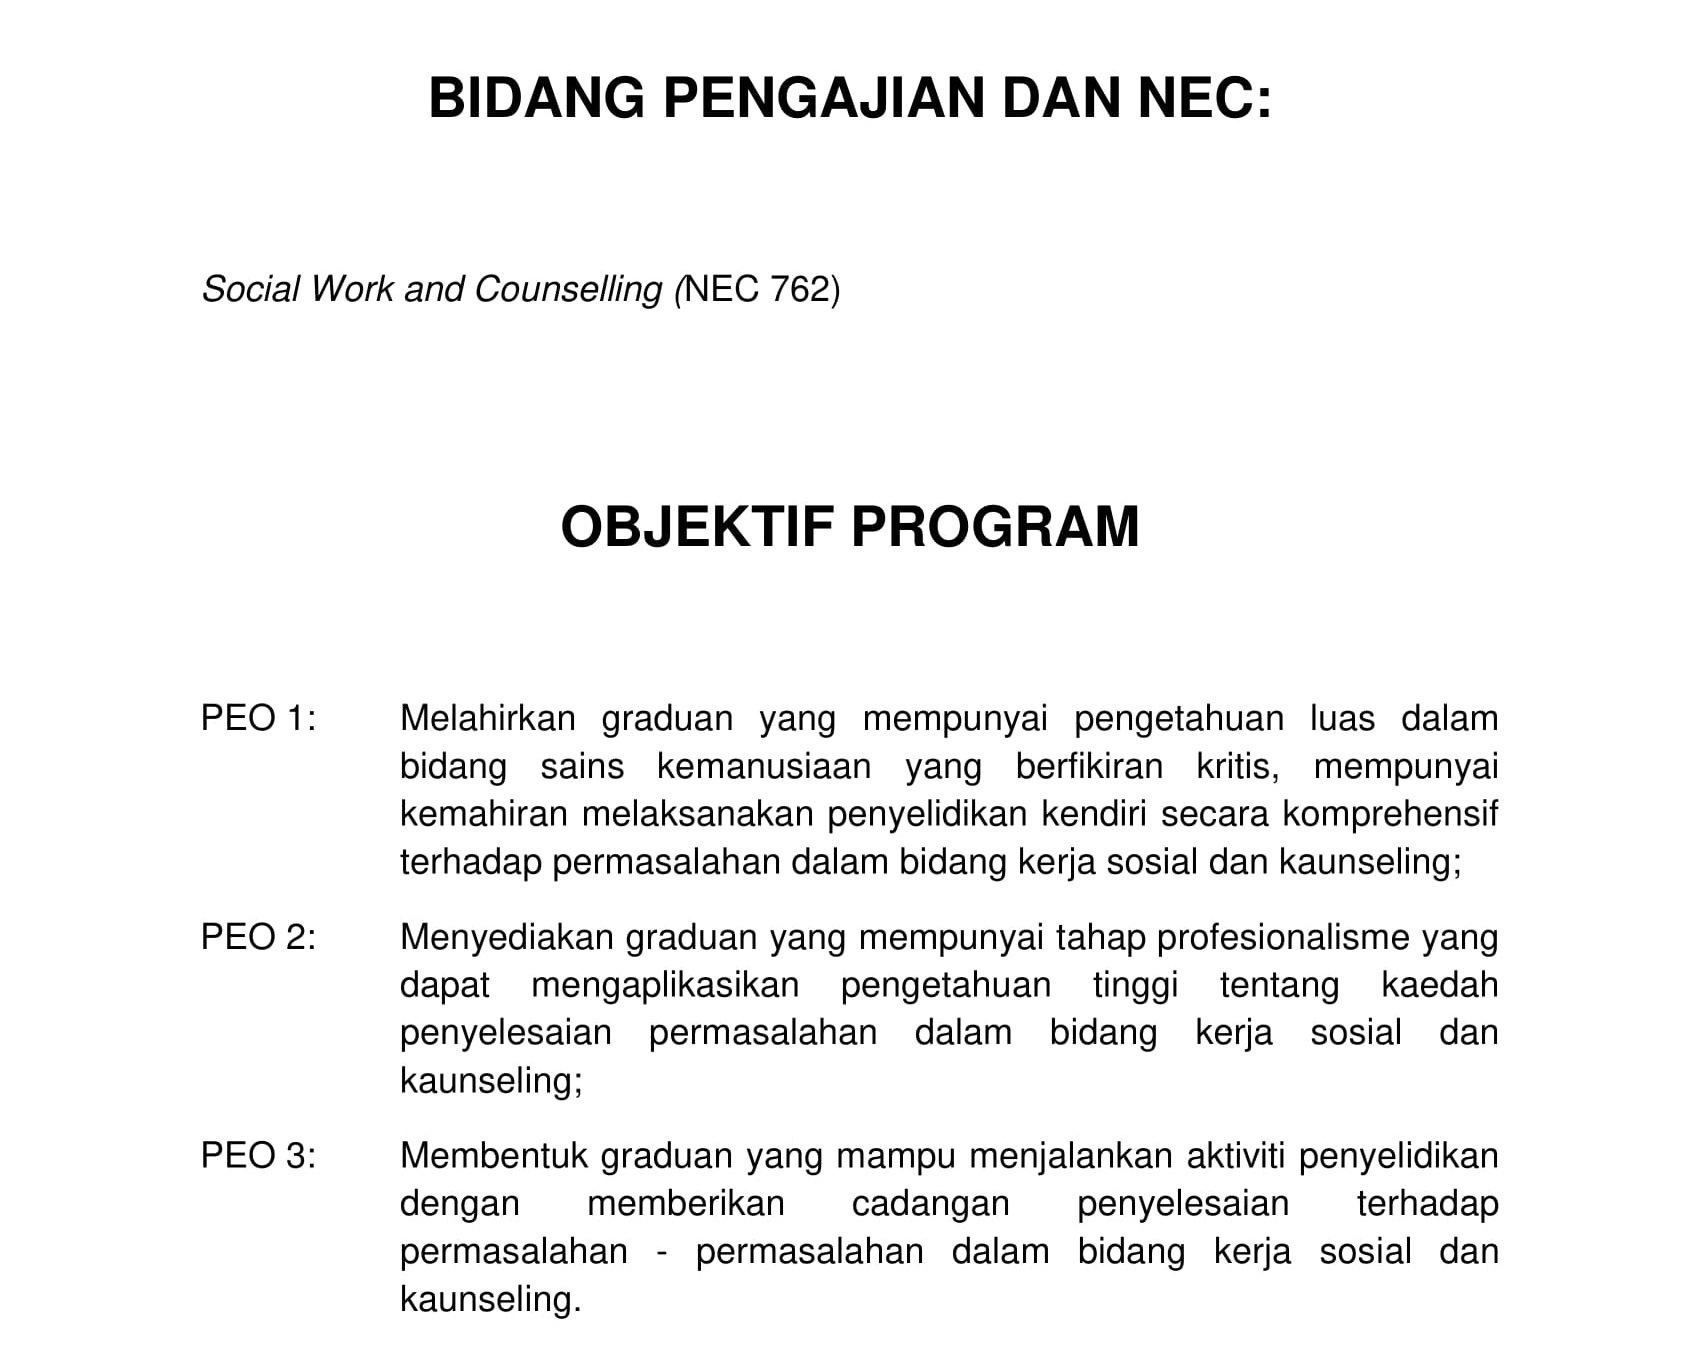 6. Sarjana Social Work and Counselling 1